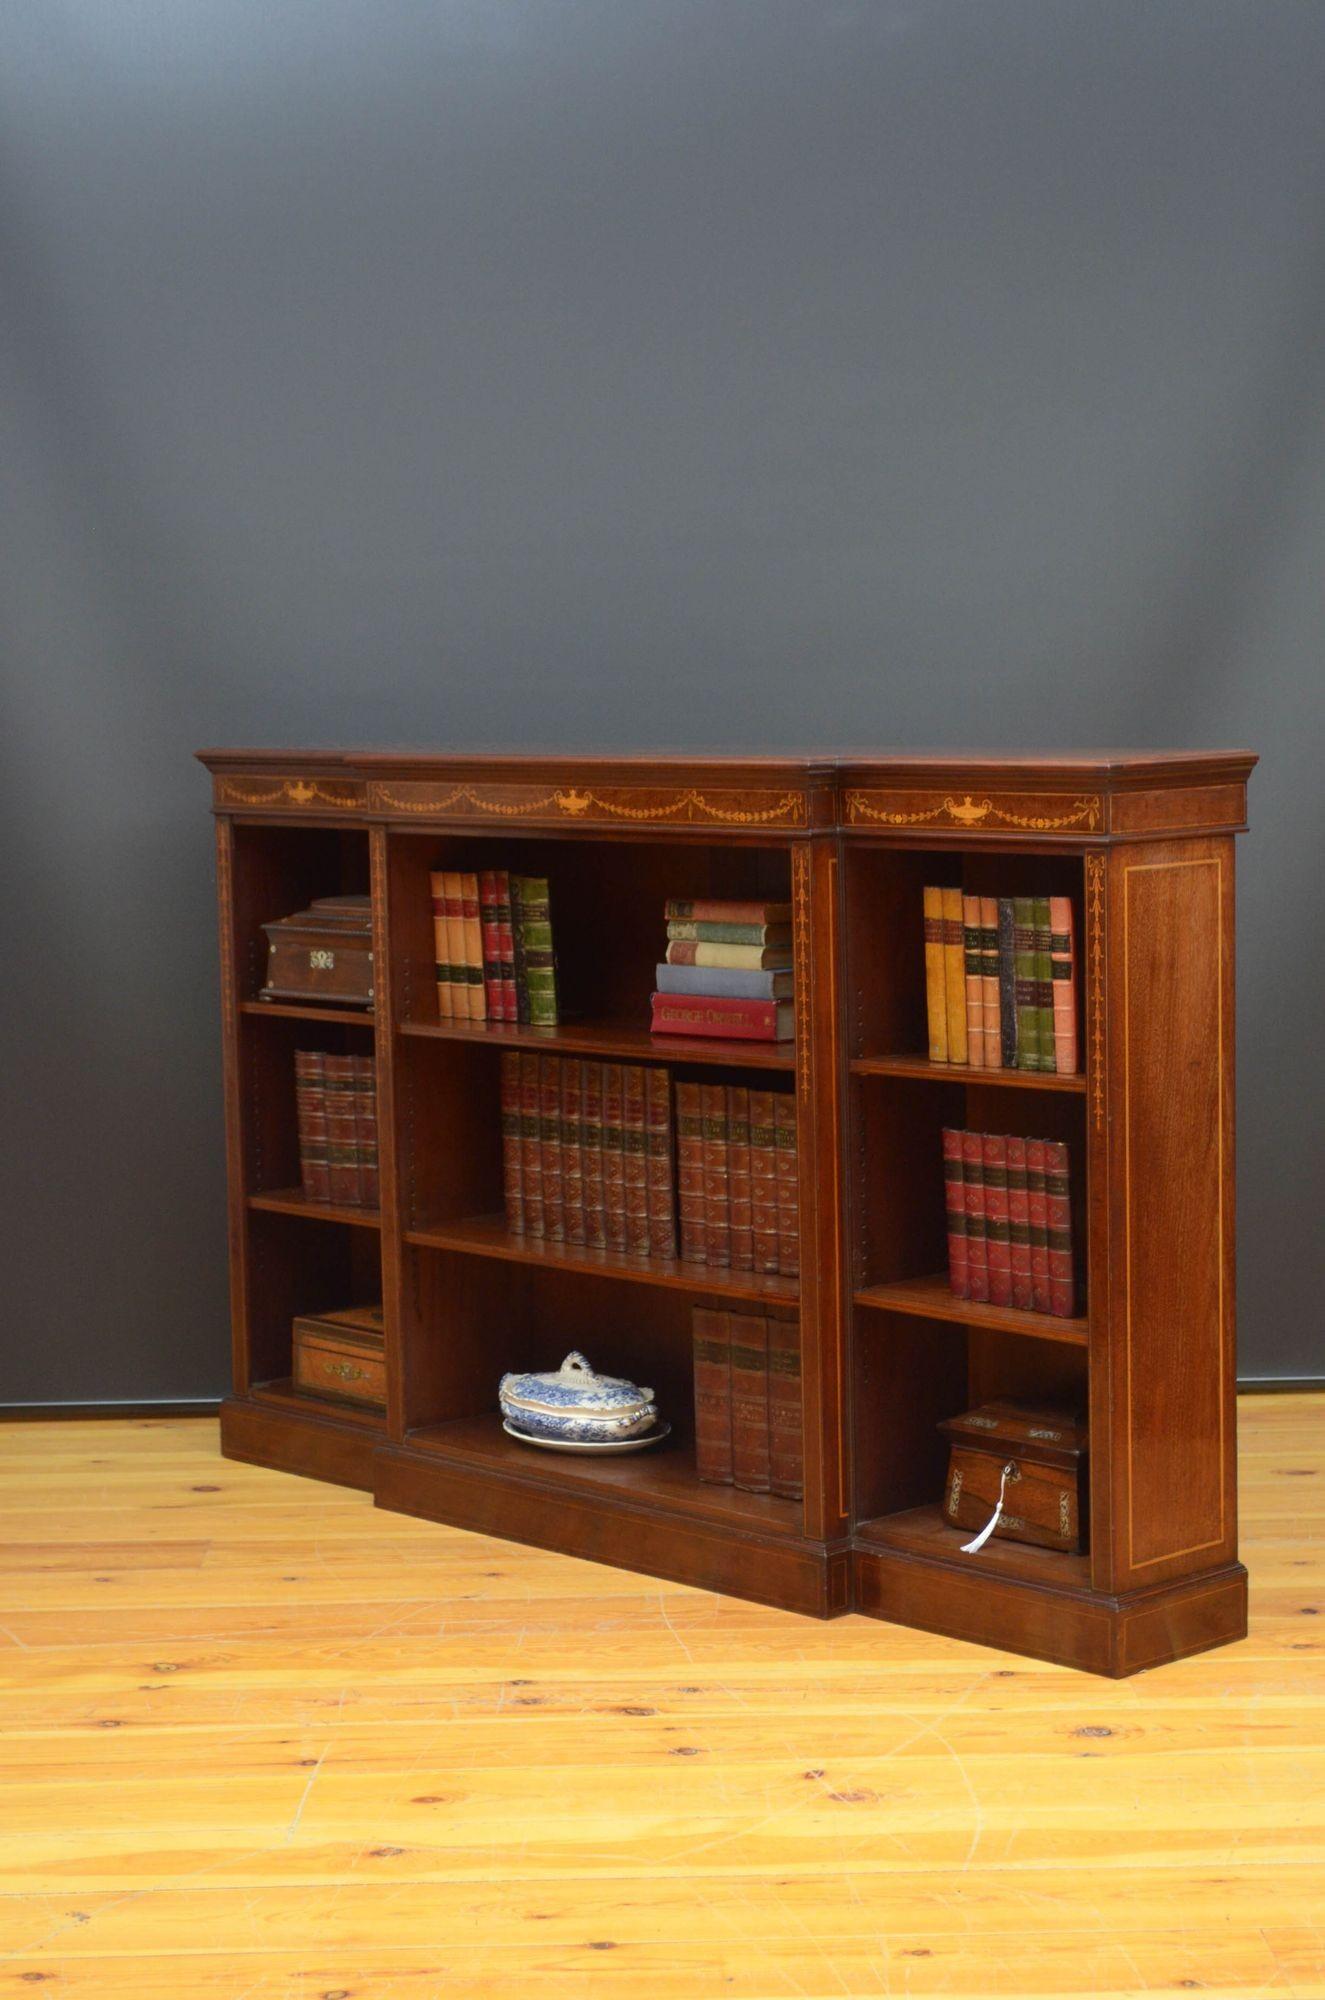 Sn5417 Fine quality late Victorian open bookcase of break fronted design, having figured mahogany top with satinwood crossbanded and vase inlaid centre, satinwood inlaid frieze depicting vases, harebells and swags and bows all above three open